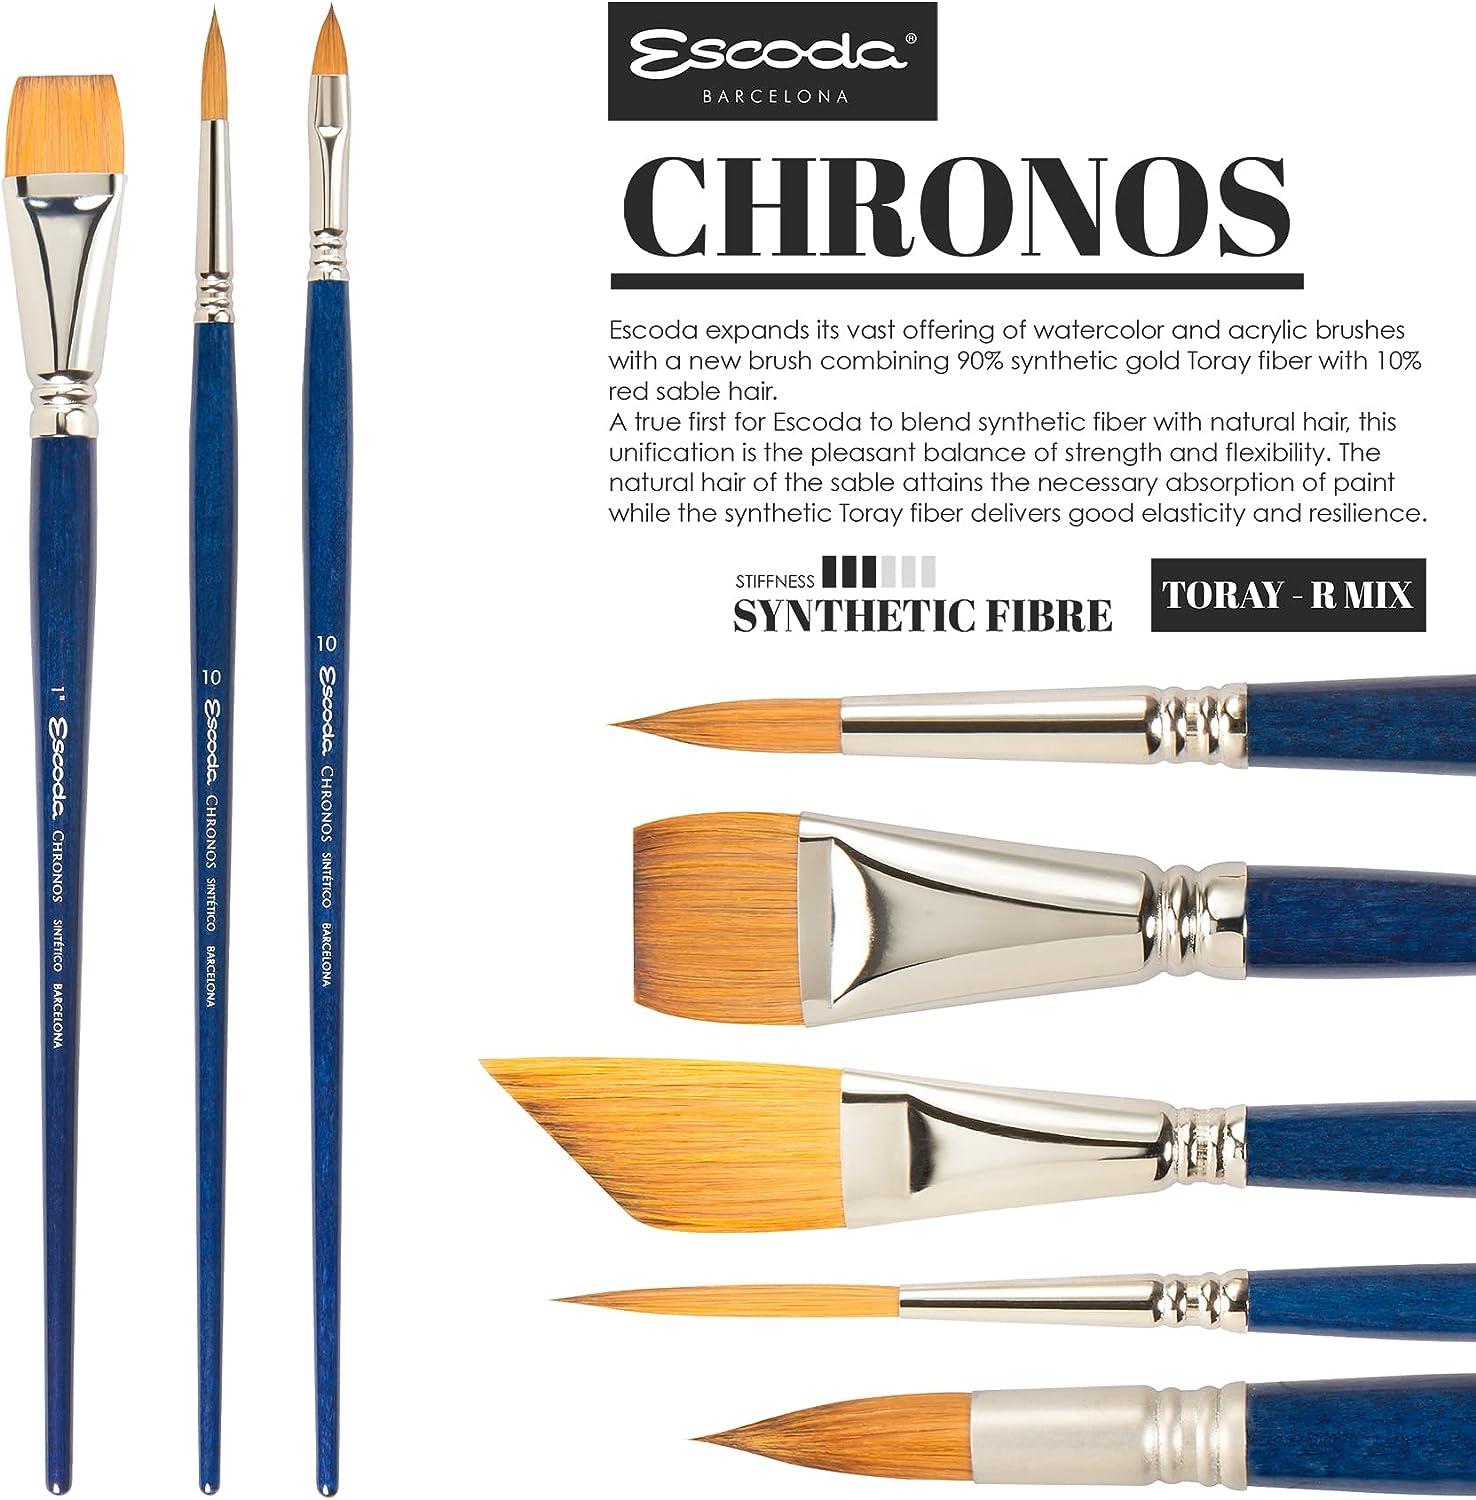 Escoda Chronos Series 3151 Artist Watercolor & Acrylic Paint Brush,  Synthetic Toray Fiber & Red Sable Blend, Pointed Round, Size 6 Size 6  Pointed Round